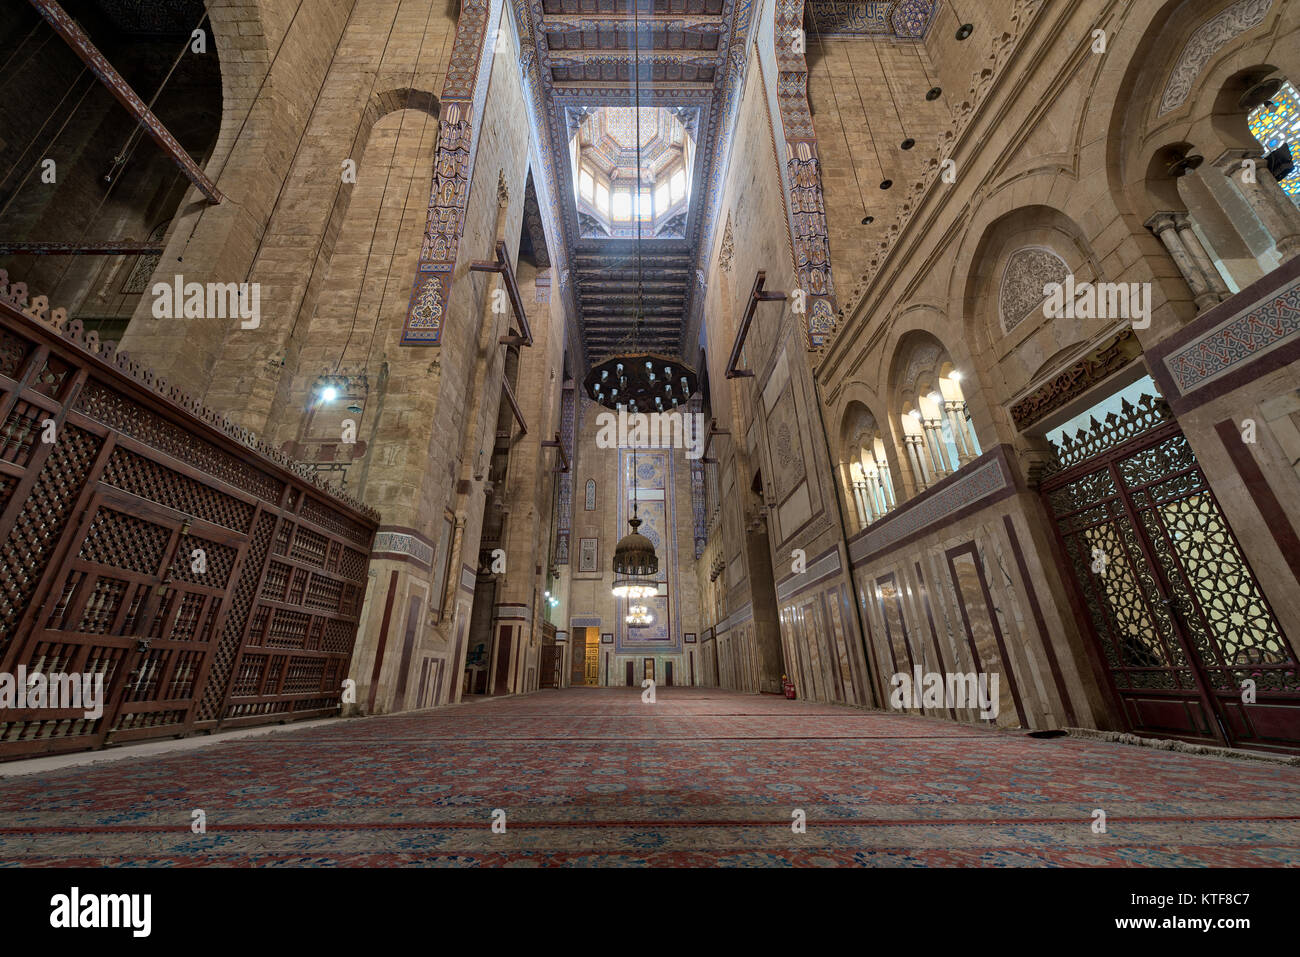 Cairo, Egypt - December 16 2017: Interior of al Refai mosque with old decorated bricks stone wall, colored marble decorations, wooden ornate ceiling,  Stock Photo